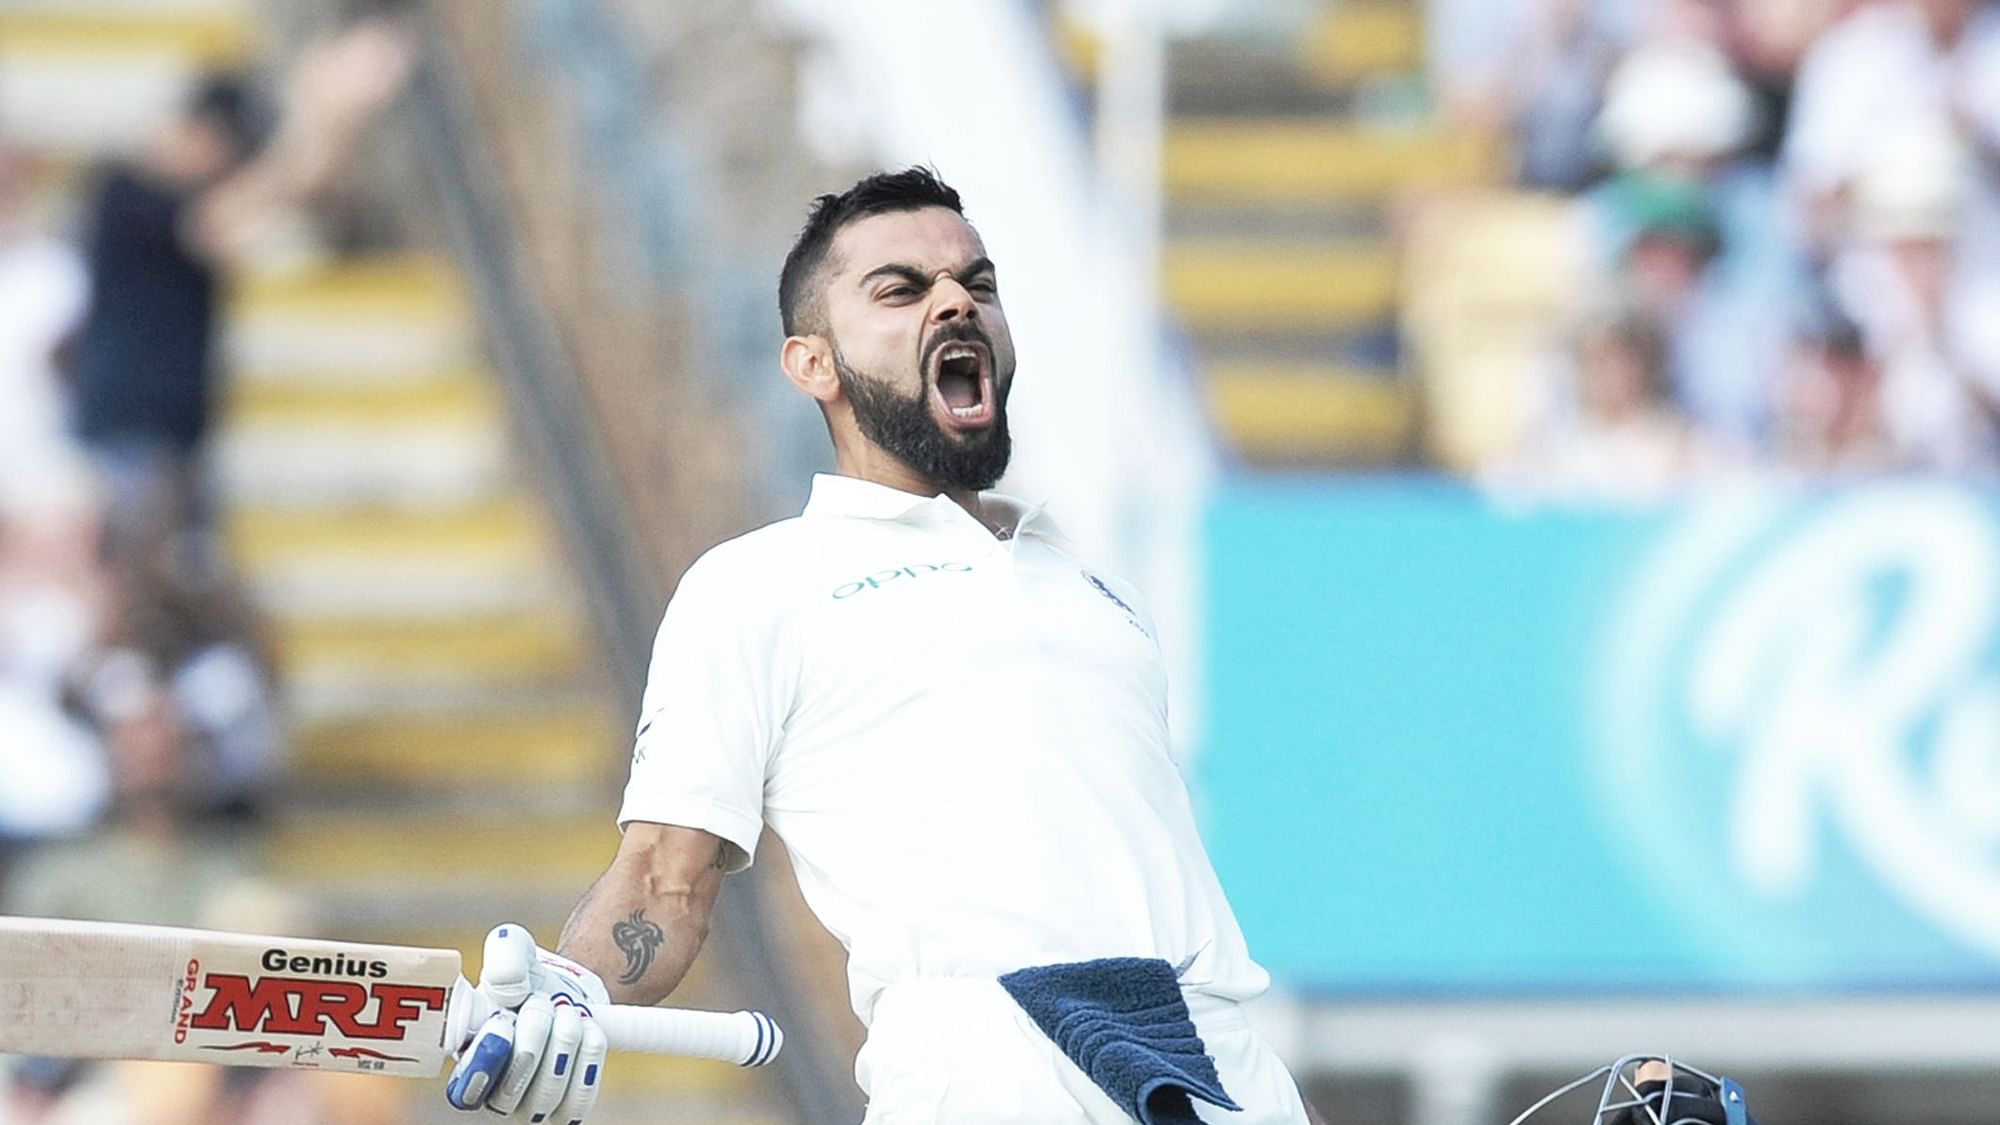 Virat Kohli celebrates his 30th birthday on 5 November, 2018. Here’s a look at why this could mark the beginning of another great chapter for him.